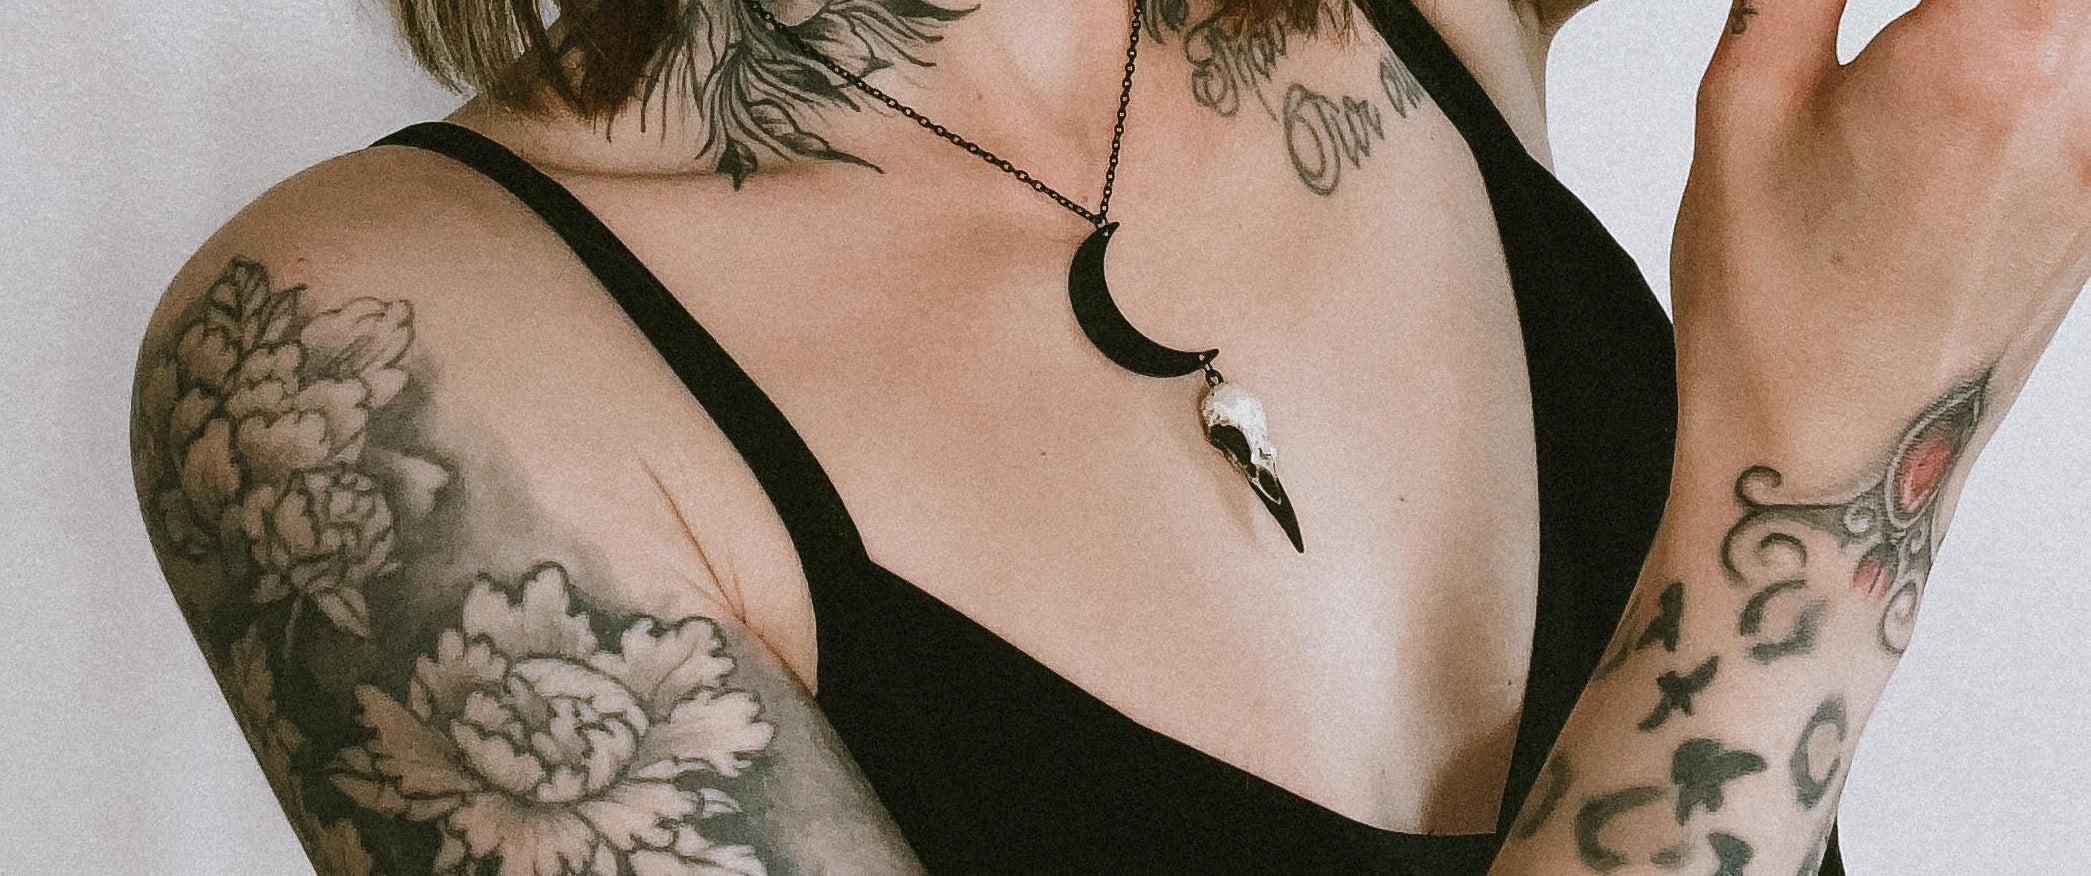 Goth model with tattoos wearing a lunar crescent moon raven skull necklace